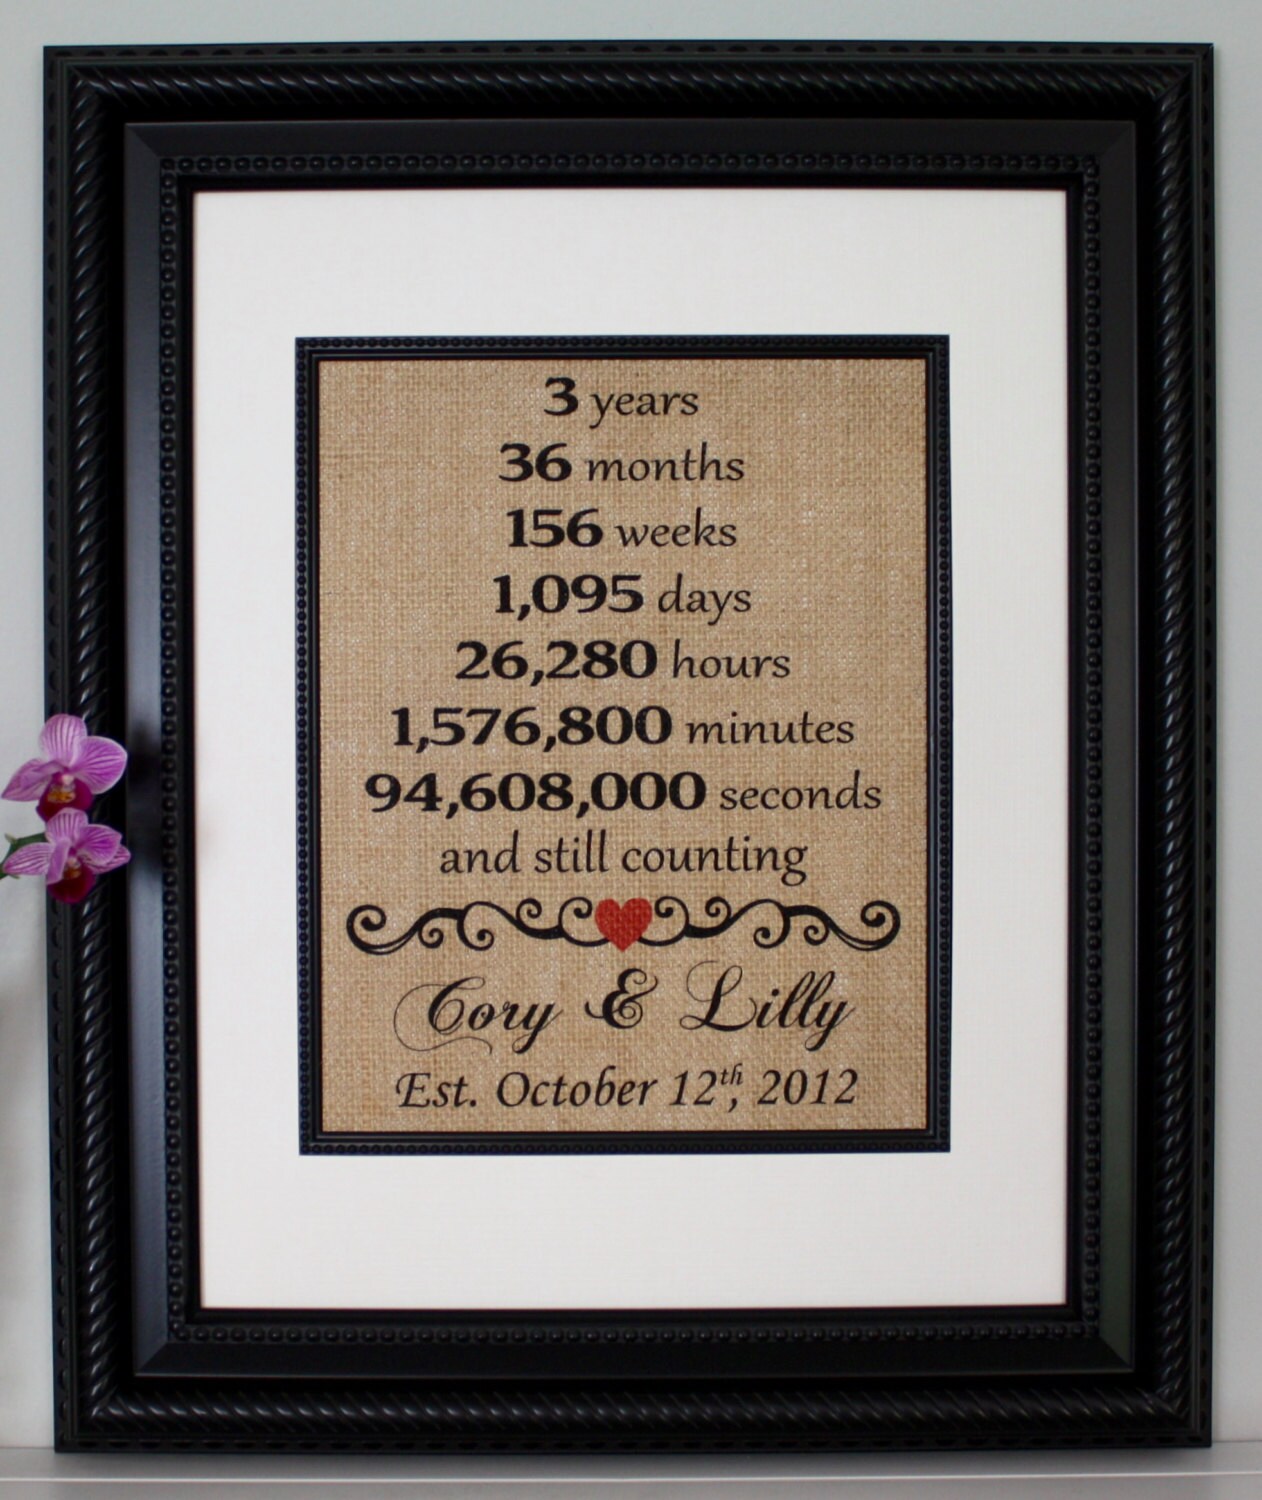 TOBOHU 3 Years of Love Burlap Print with Frame, Gifts for Husband Wife 3rd  Wedding Anniversary, Gifts for Him Her 3 Years Anniversary, Couples 3rd